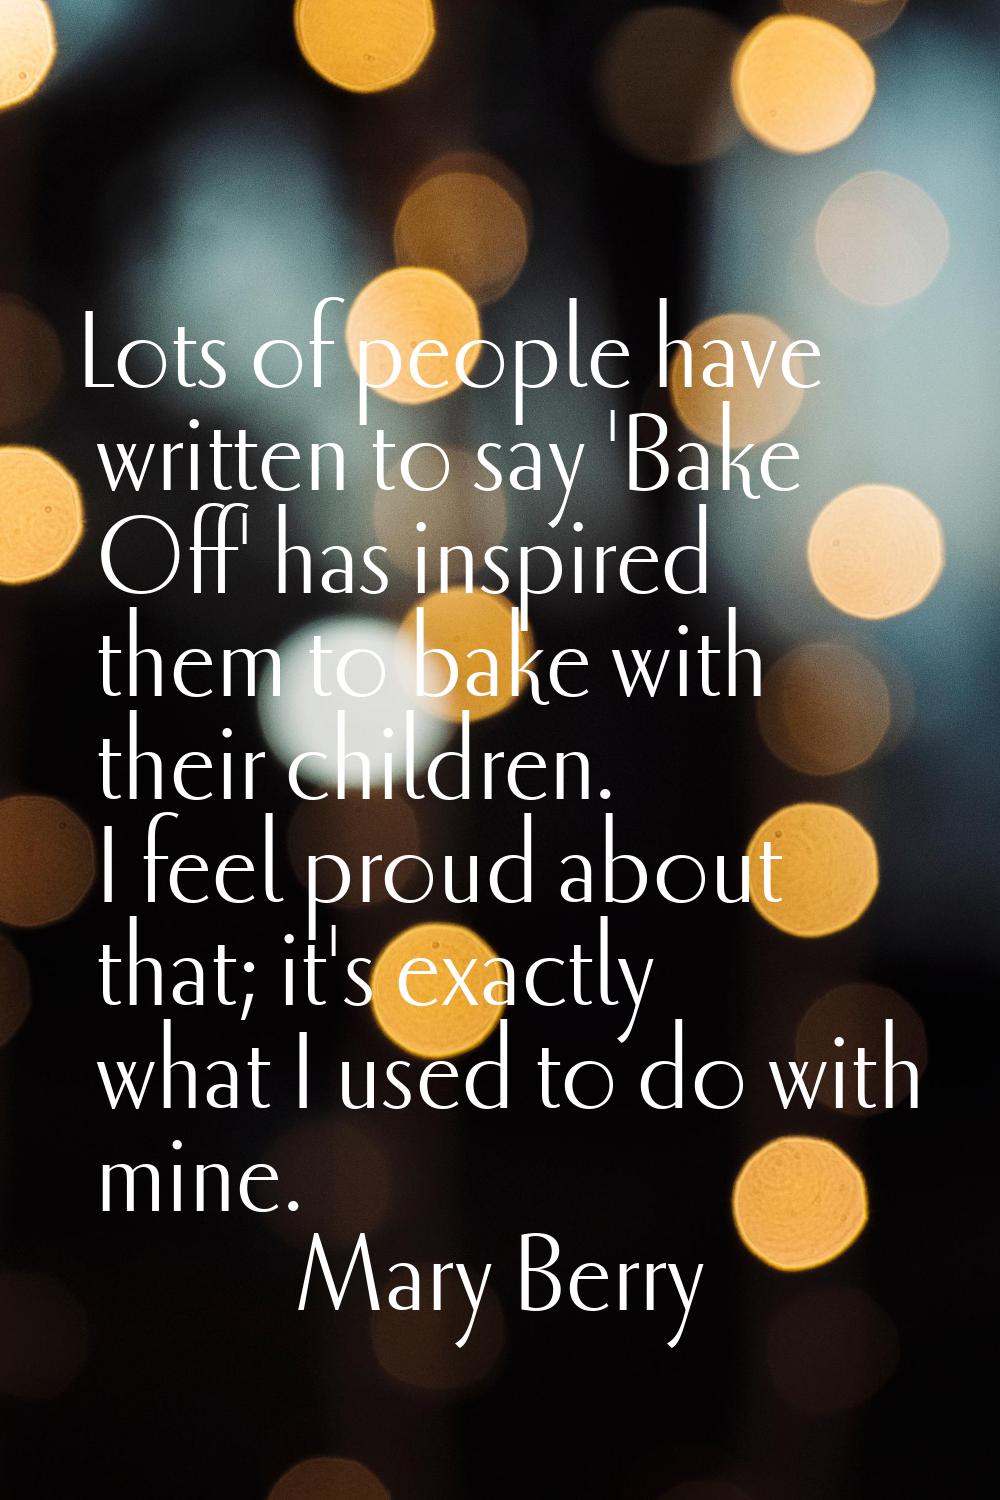 Lots of people have written to say 'Bake Off' has inspired them to bake with their children. I feel